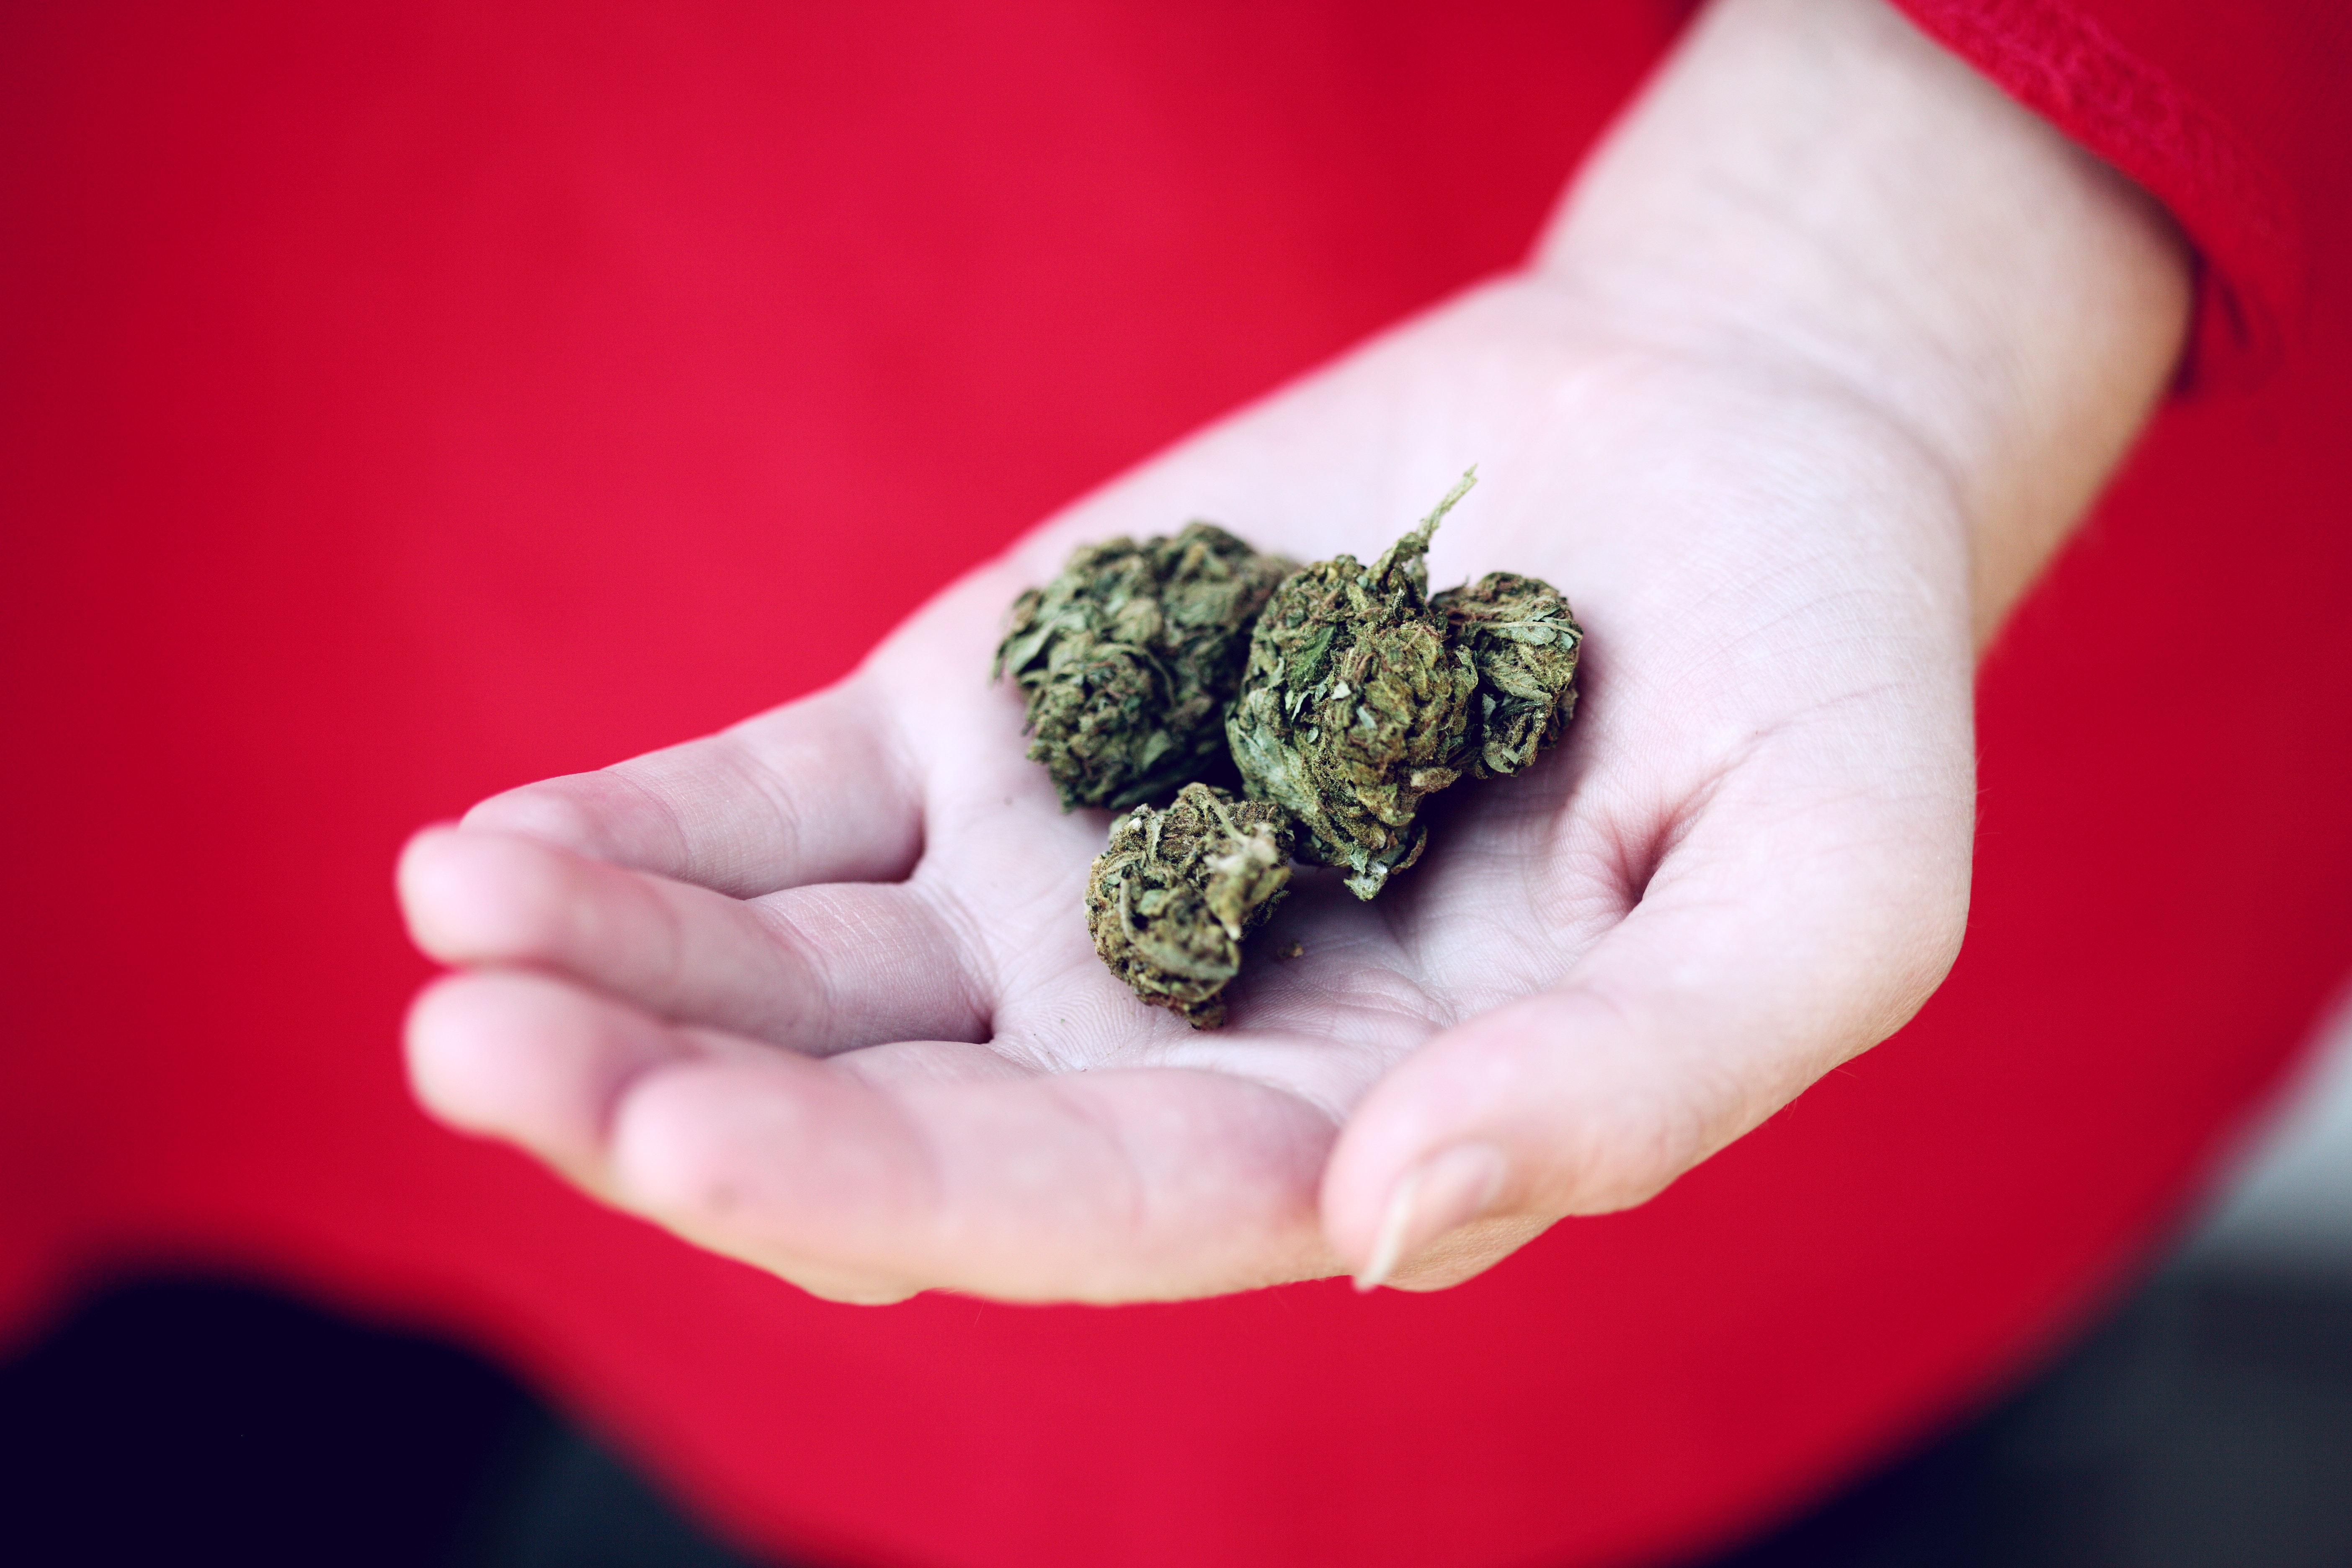 A few buds of marijuana (weed) in an outstretched hand.